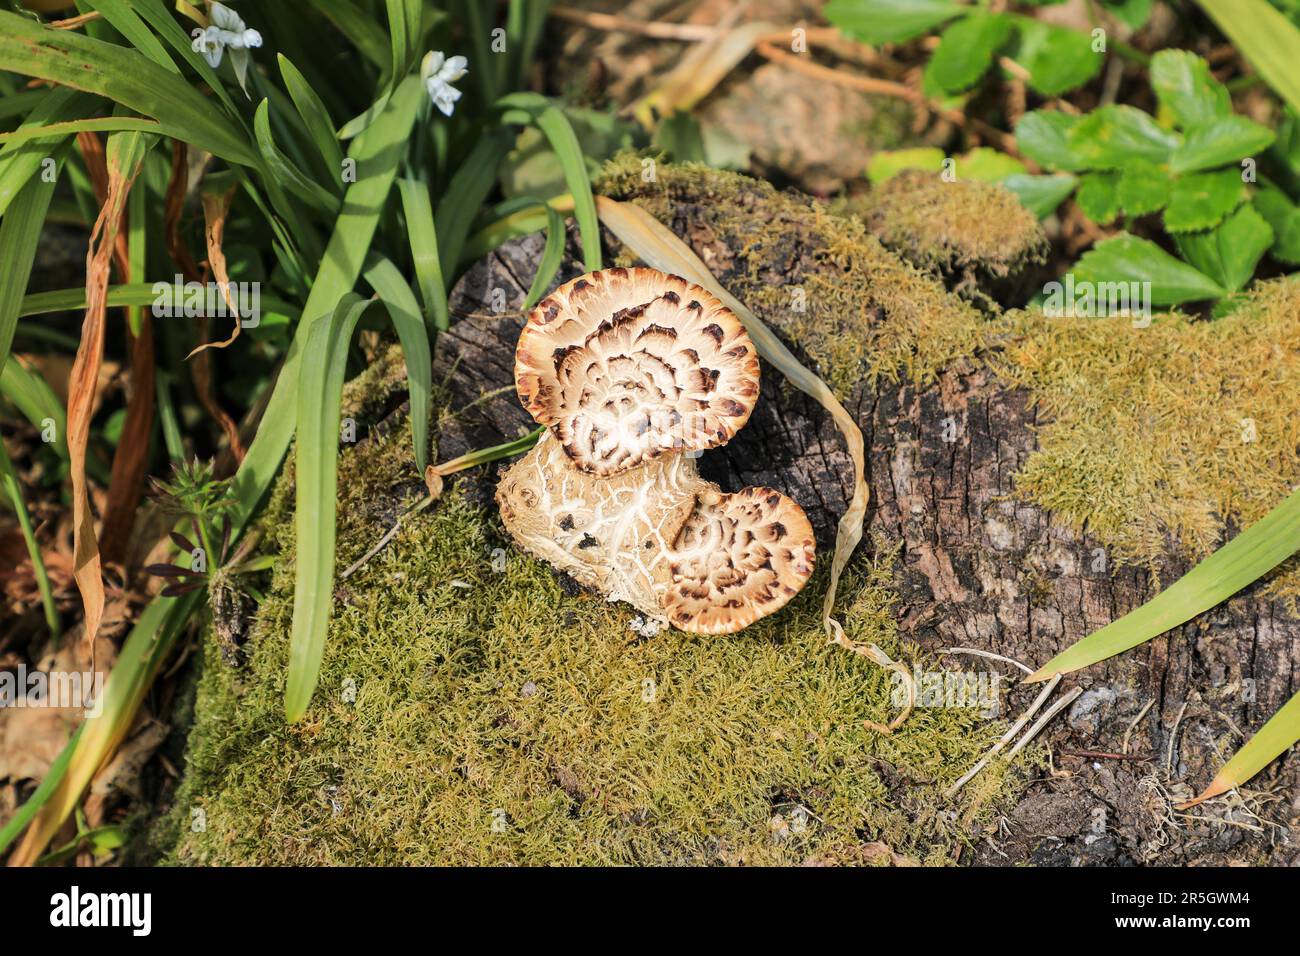 Sarcodon imbricatus, commonly known as the shingled hedgehog or scaly hedgehog, is a species of tooth fungus, England, UK Stock Photo